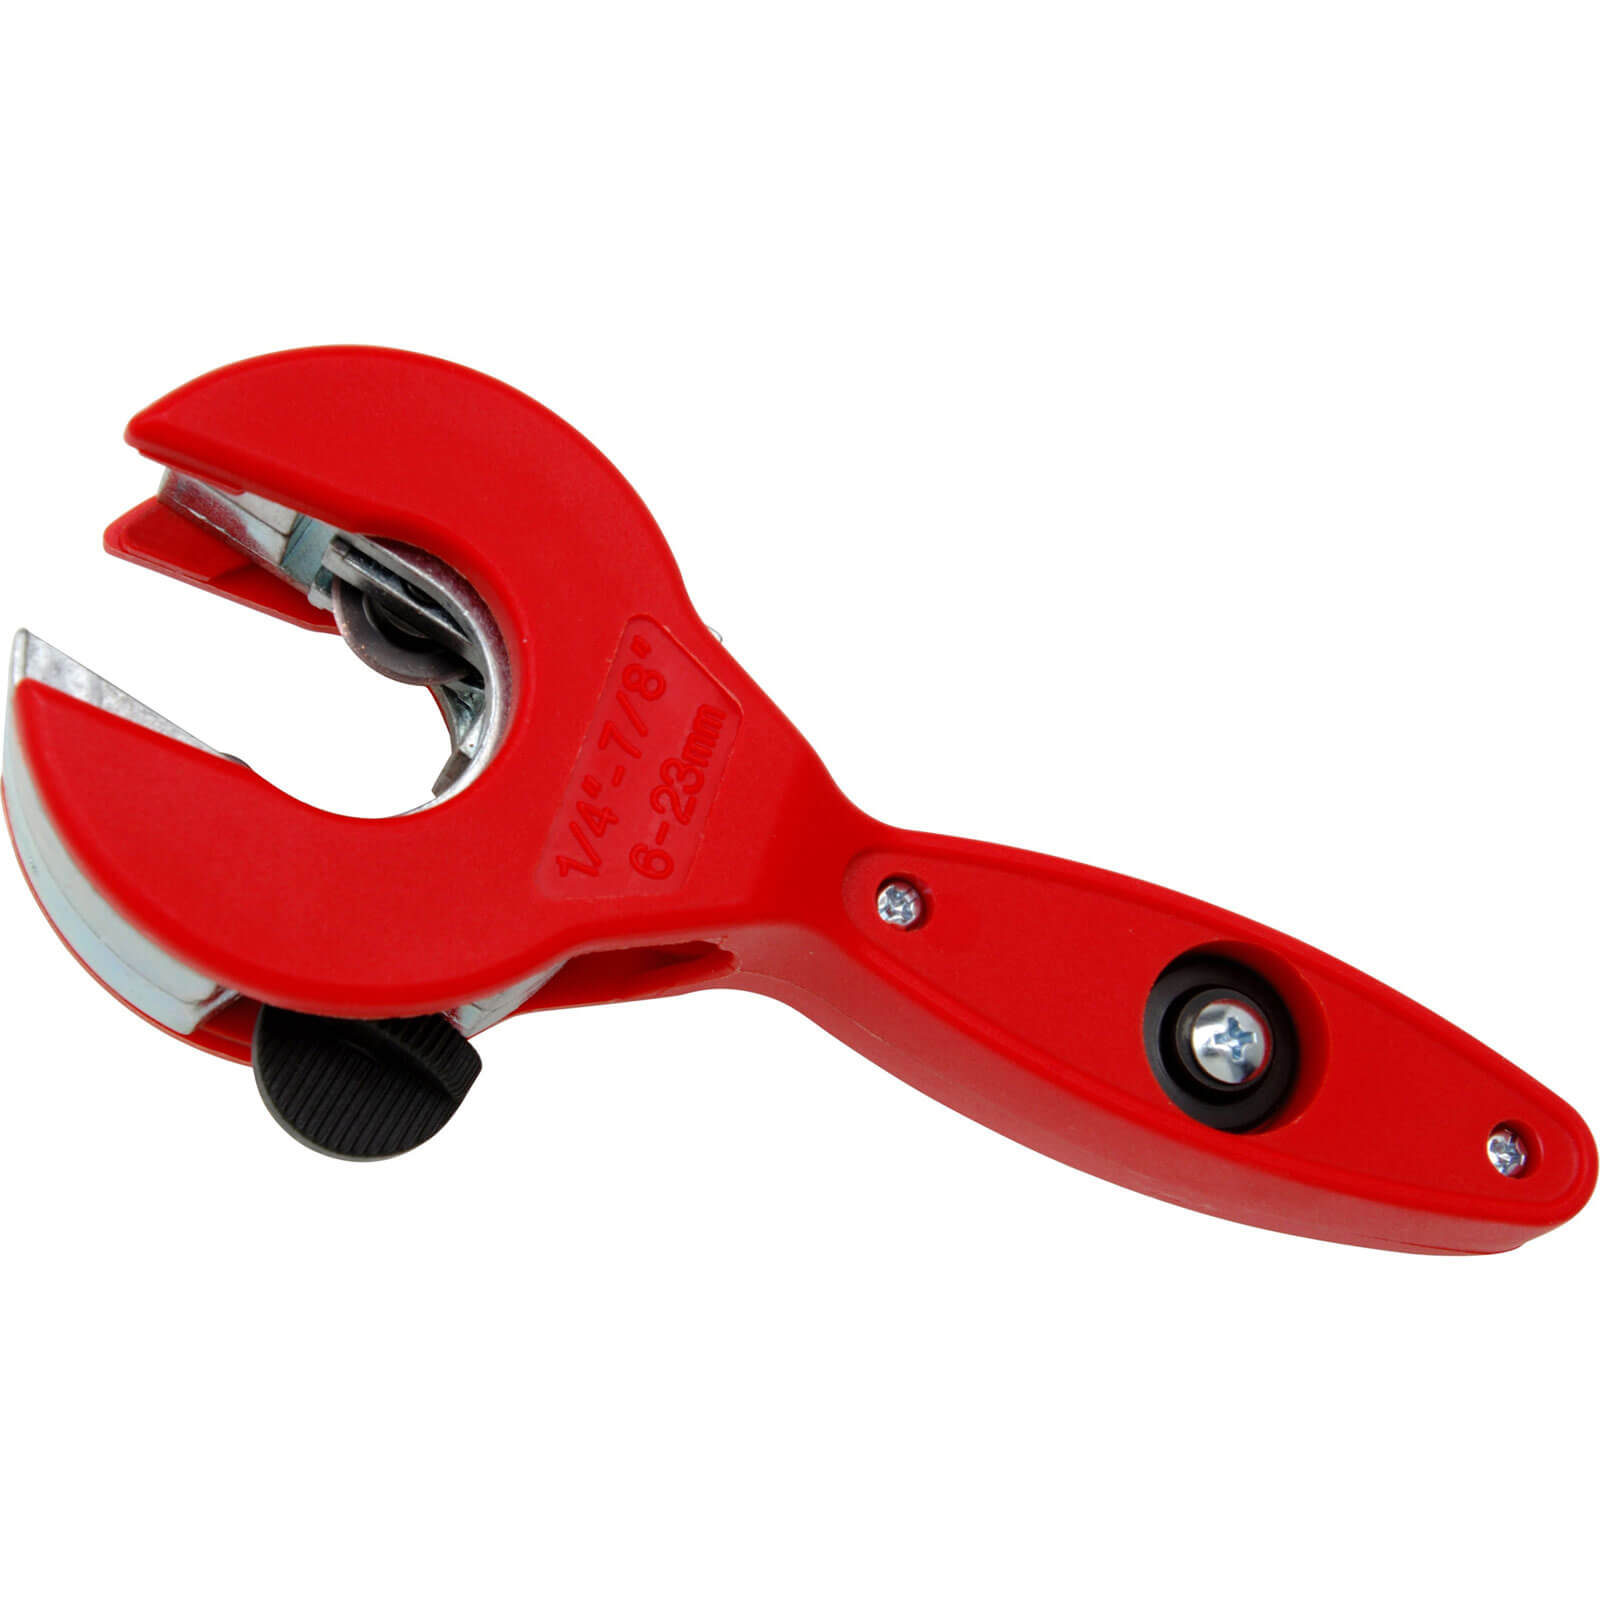 Image of Wiss Ratchet Pipe Cutters 6mm - 23mm